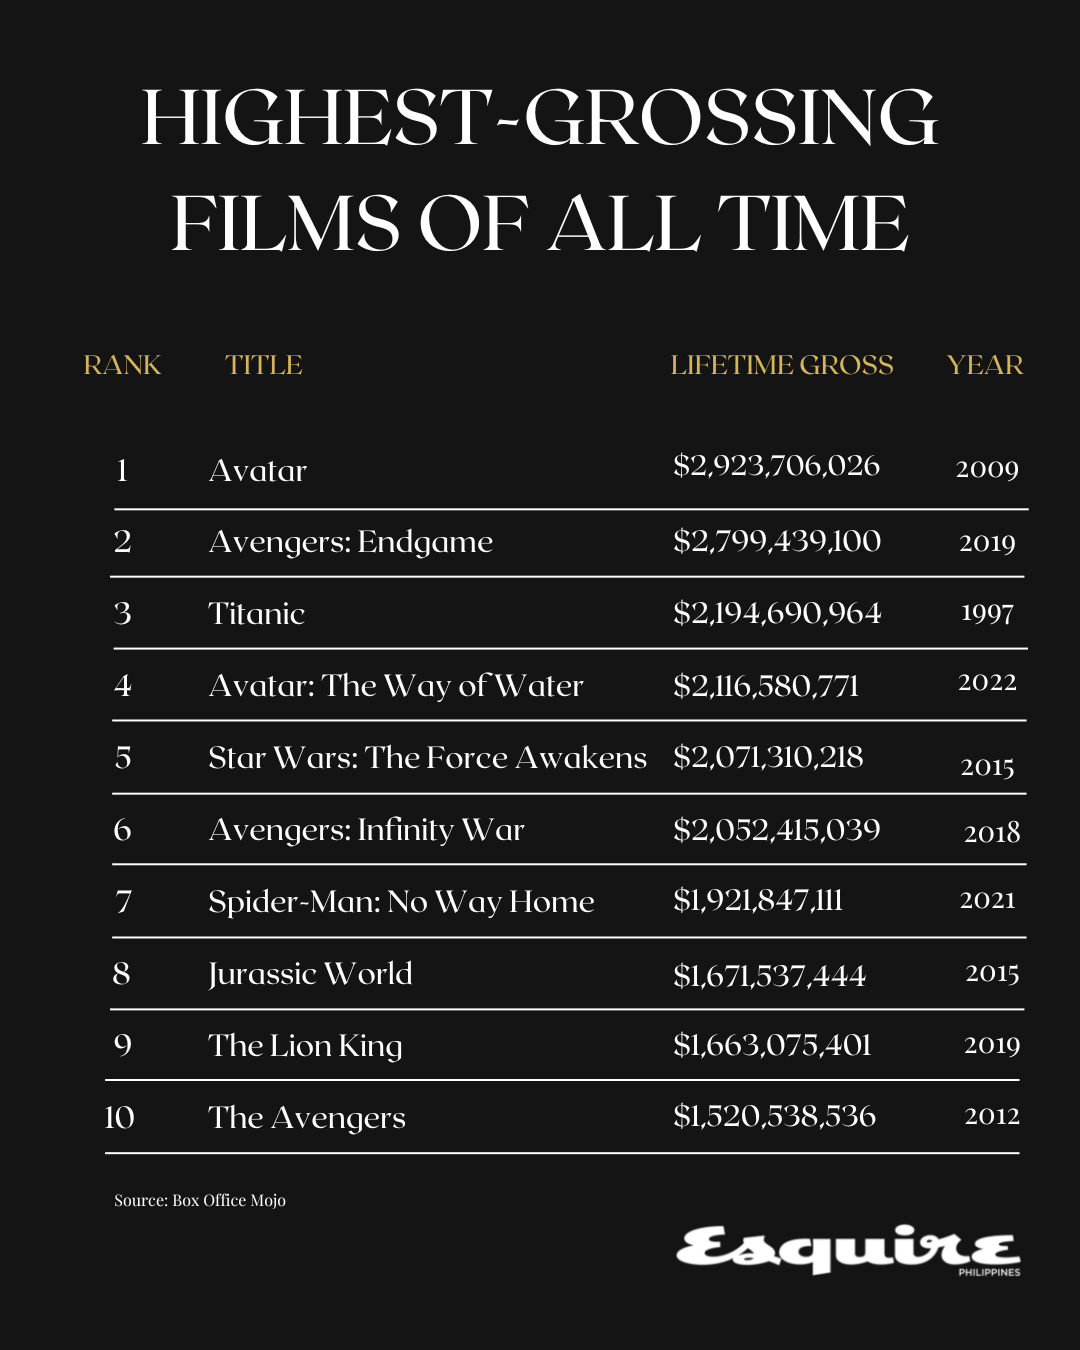 Avatar The Way of Water 4th highestgrossing movie